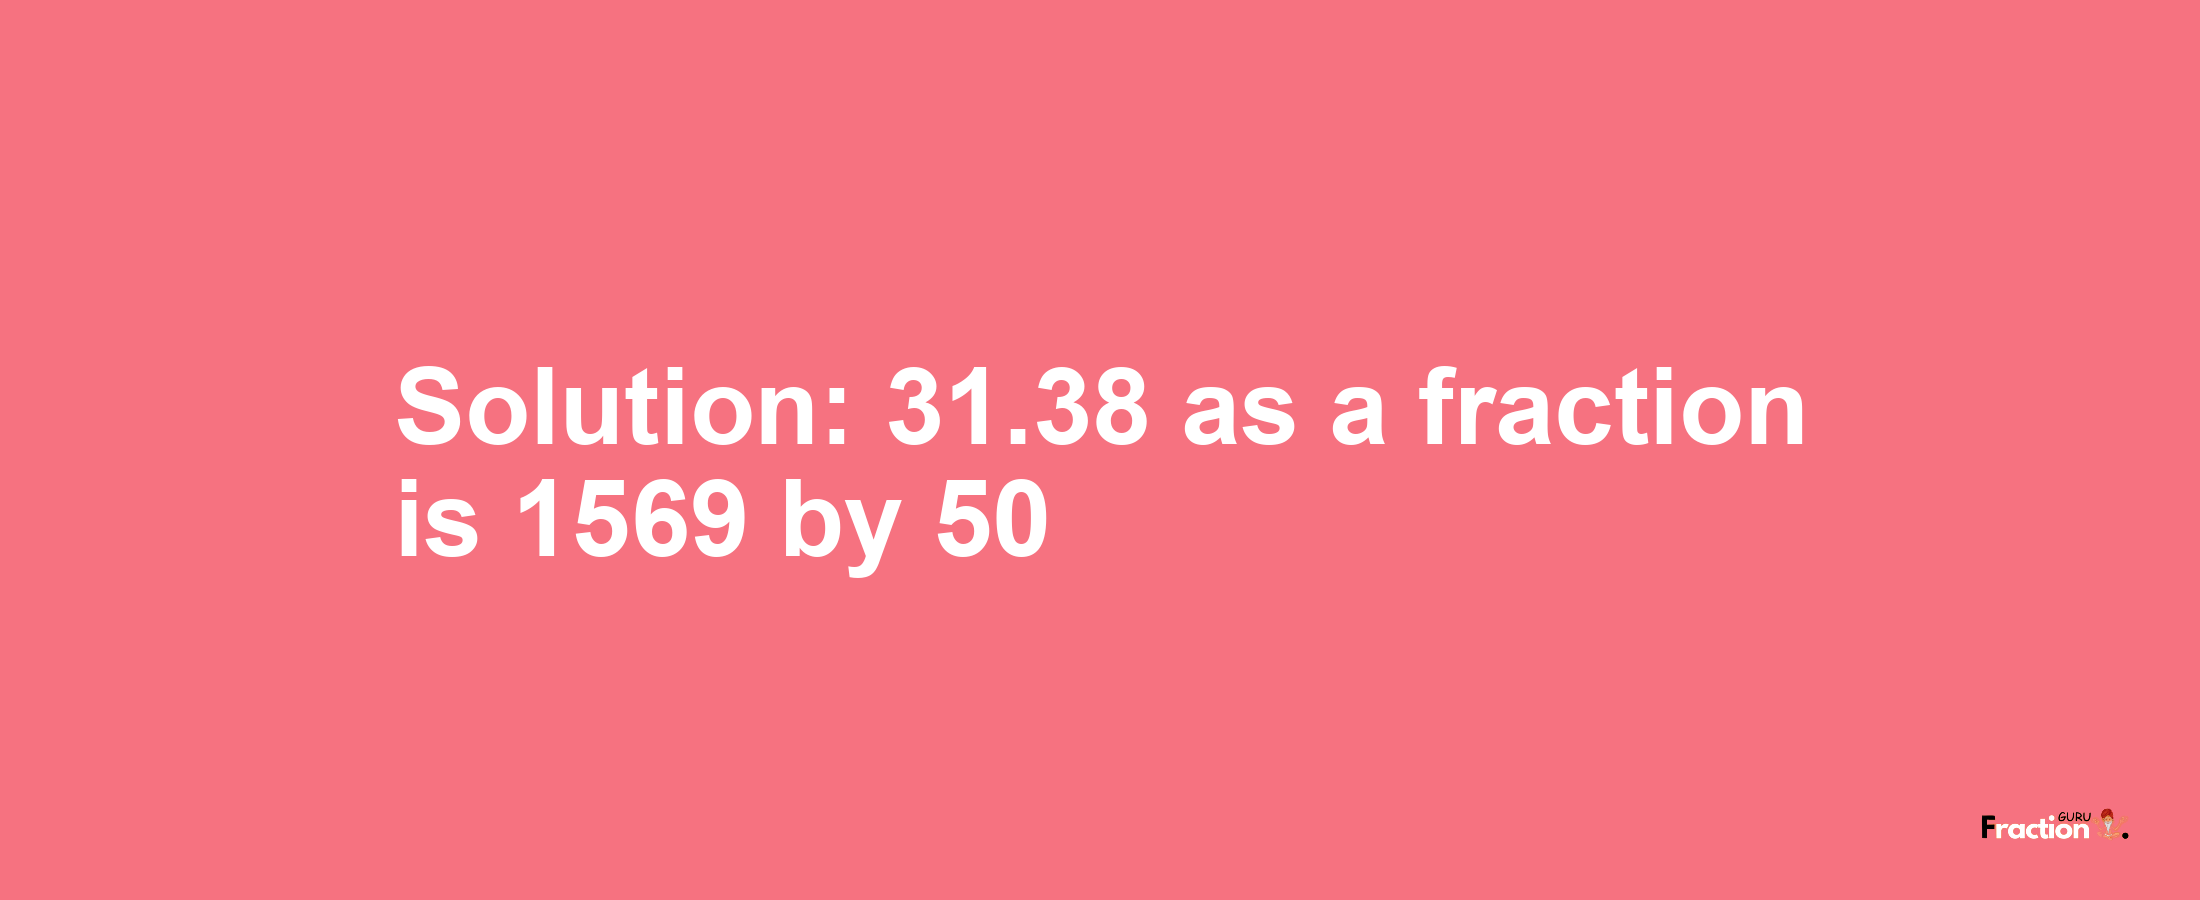 Solution:31.38 as a fraction is 1569/50